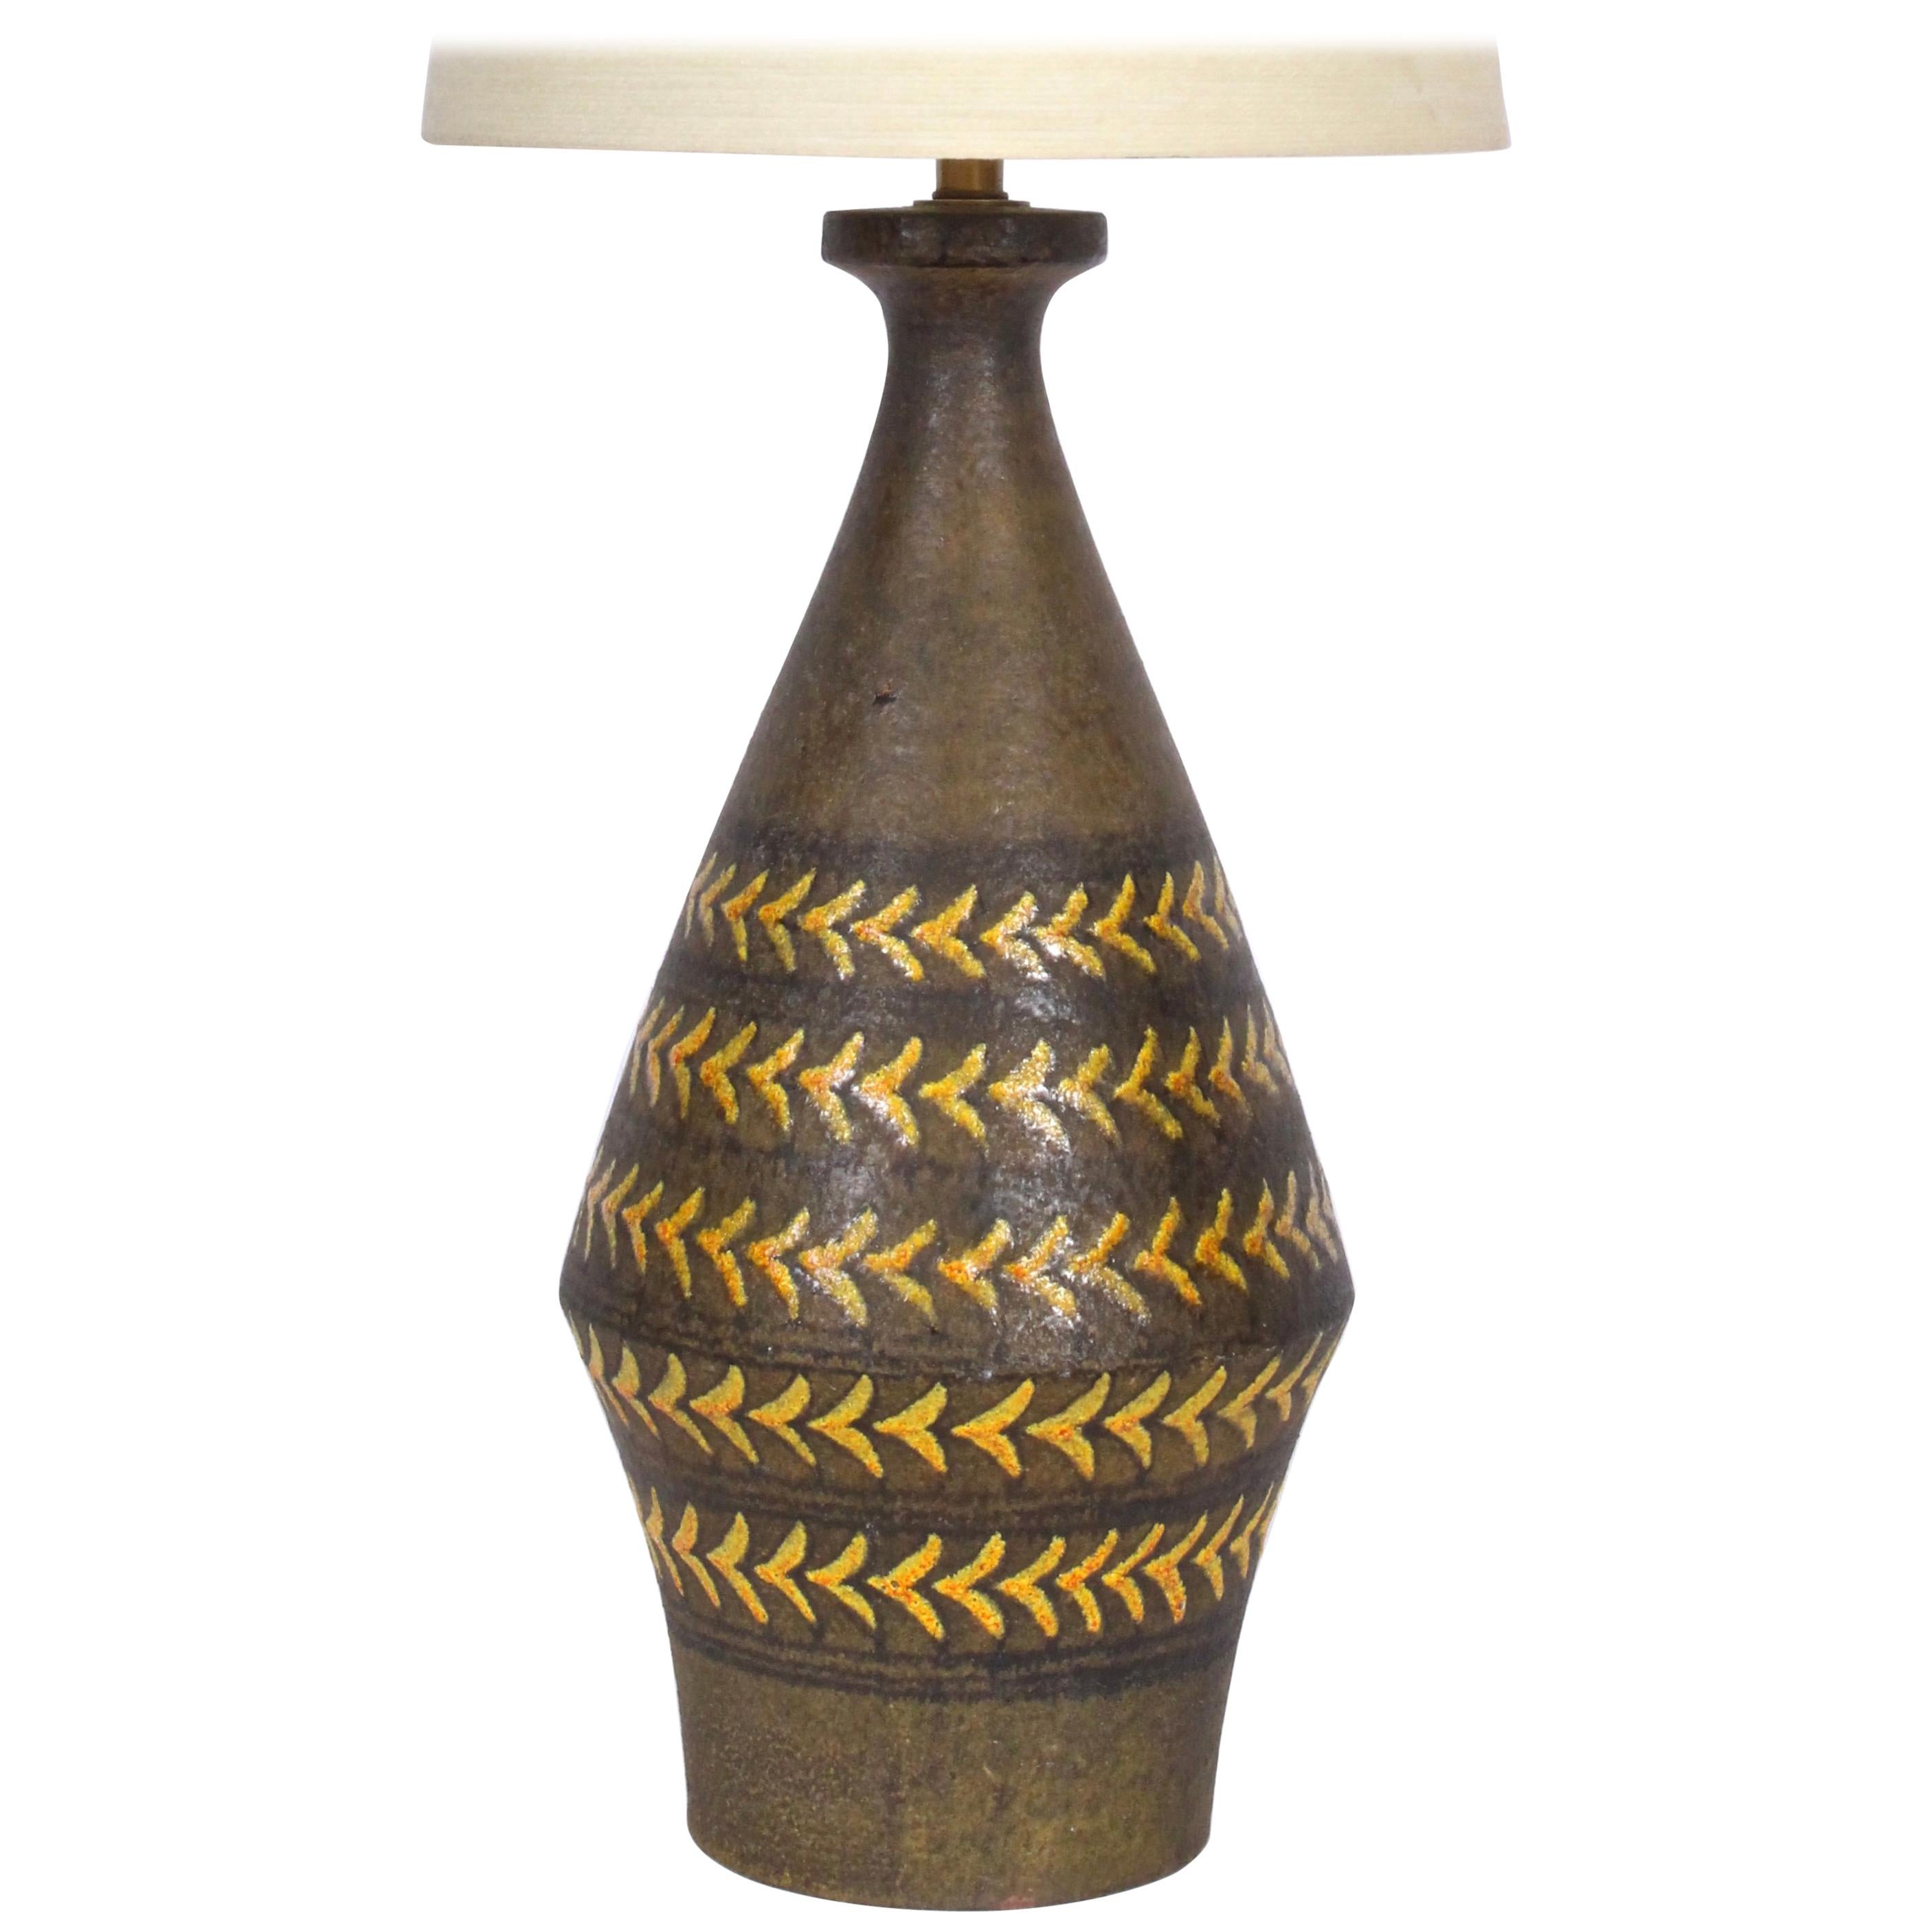 Substantial Aldo Londi for Bitossi Cocoa & Yellow "Arrowhead" Pottery Table Lamp For Sale